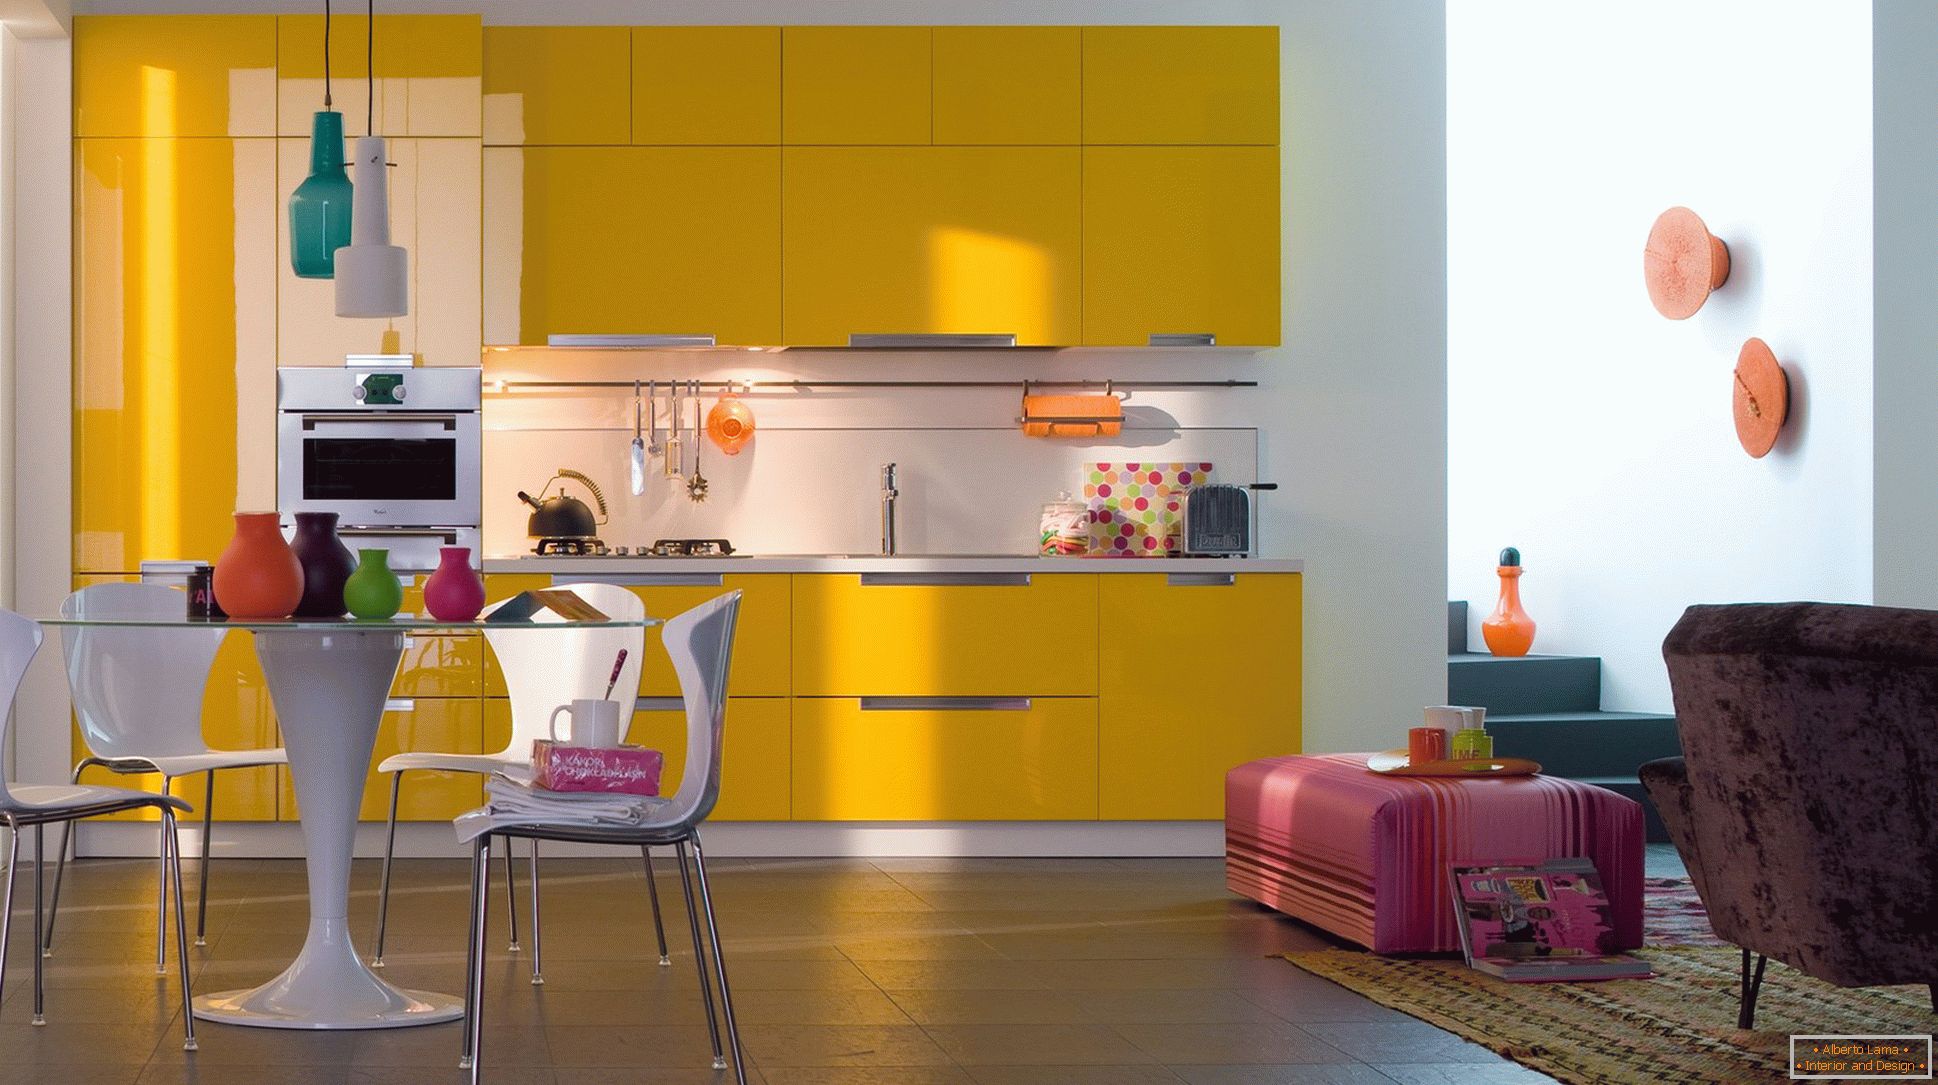 Yellow kitchen in the interior